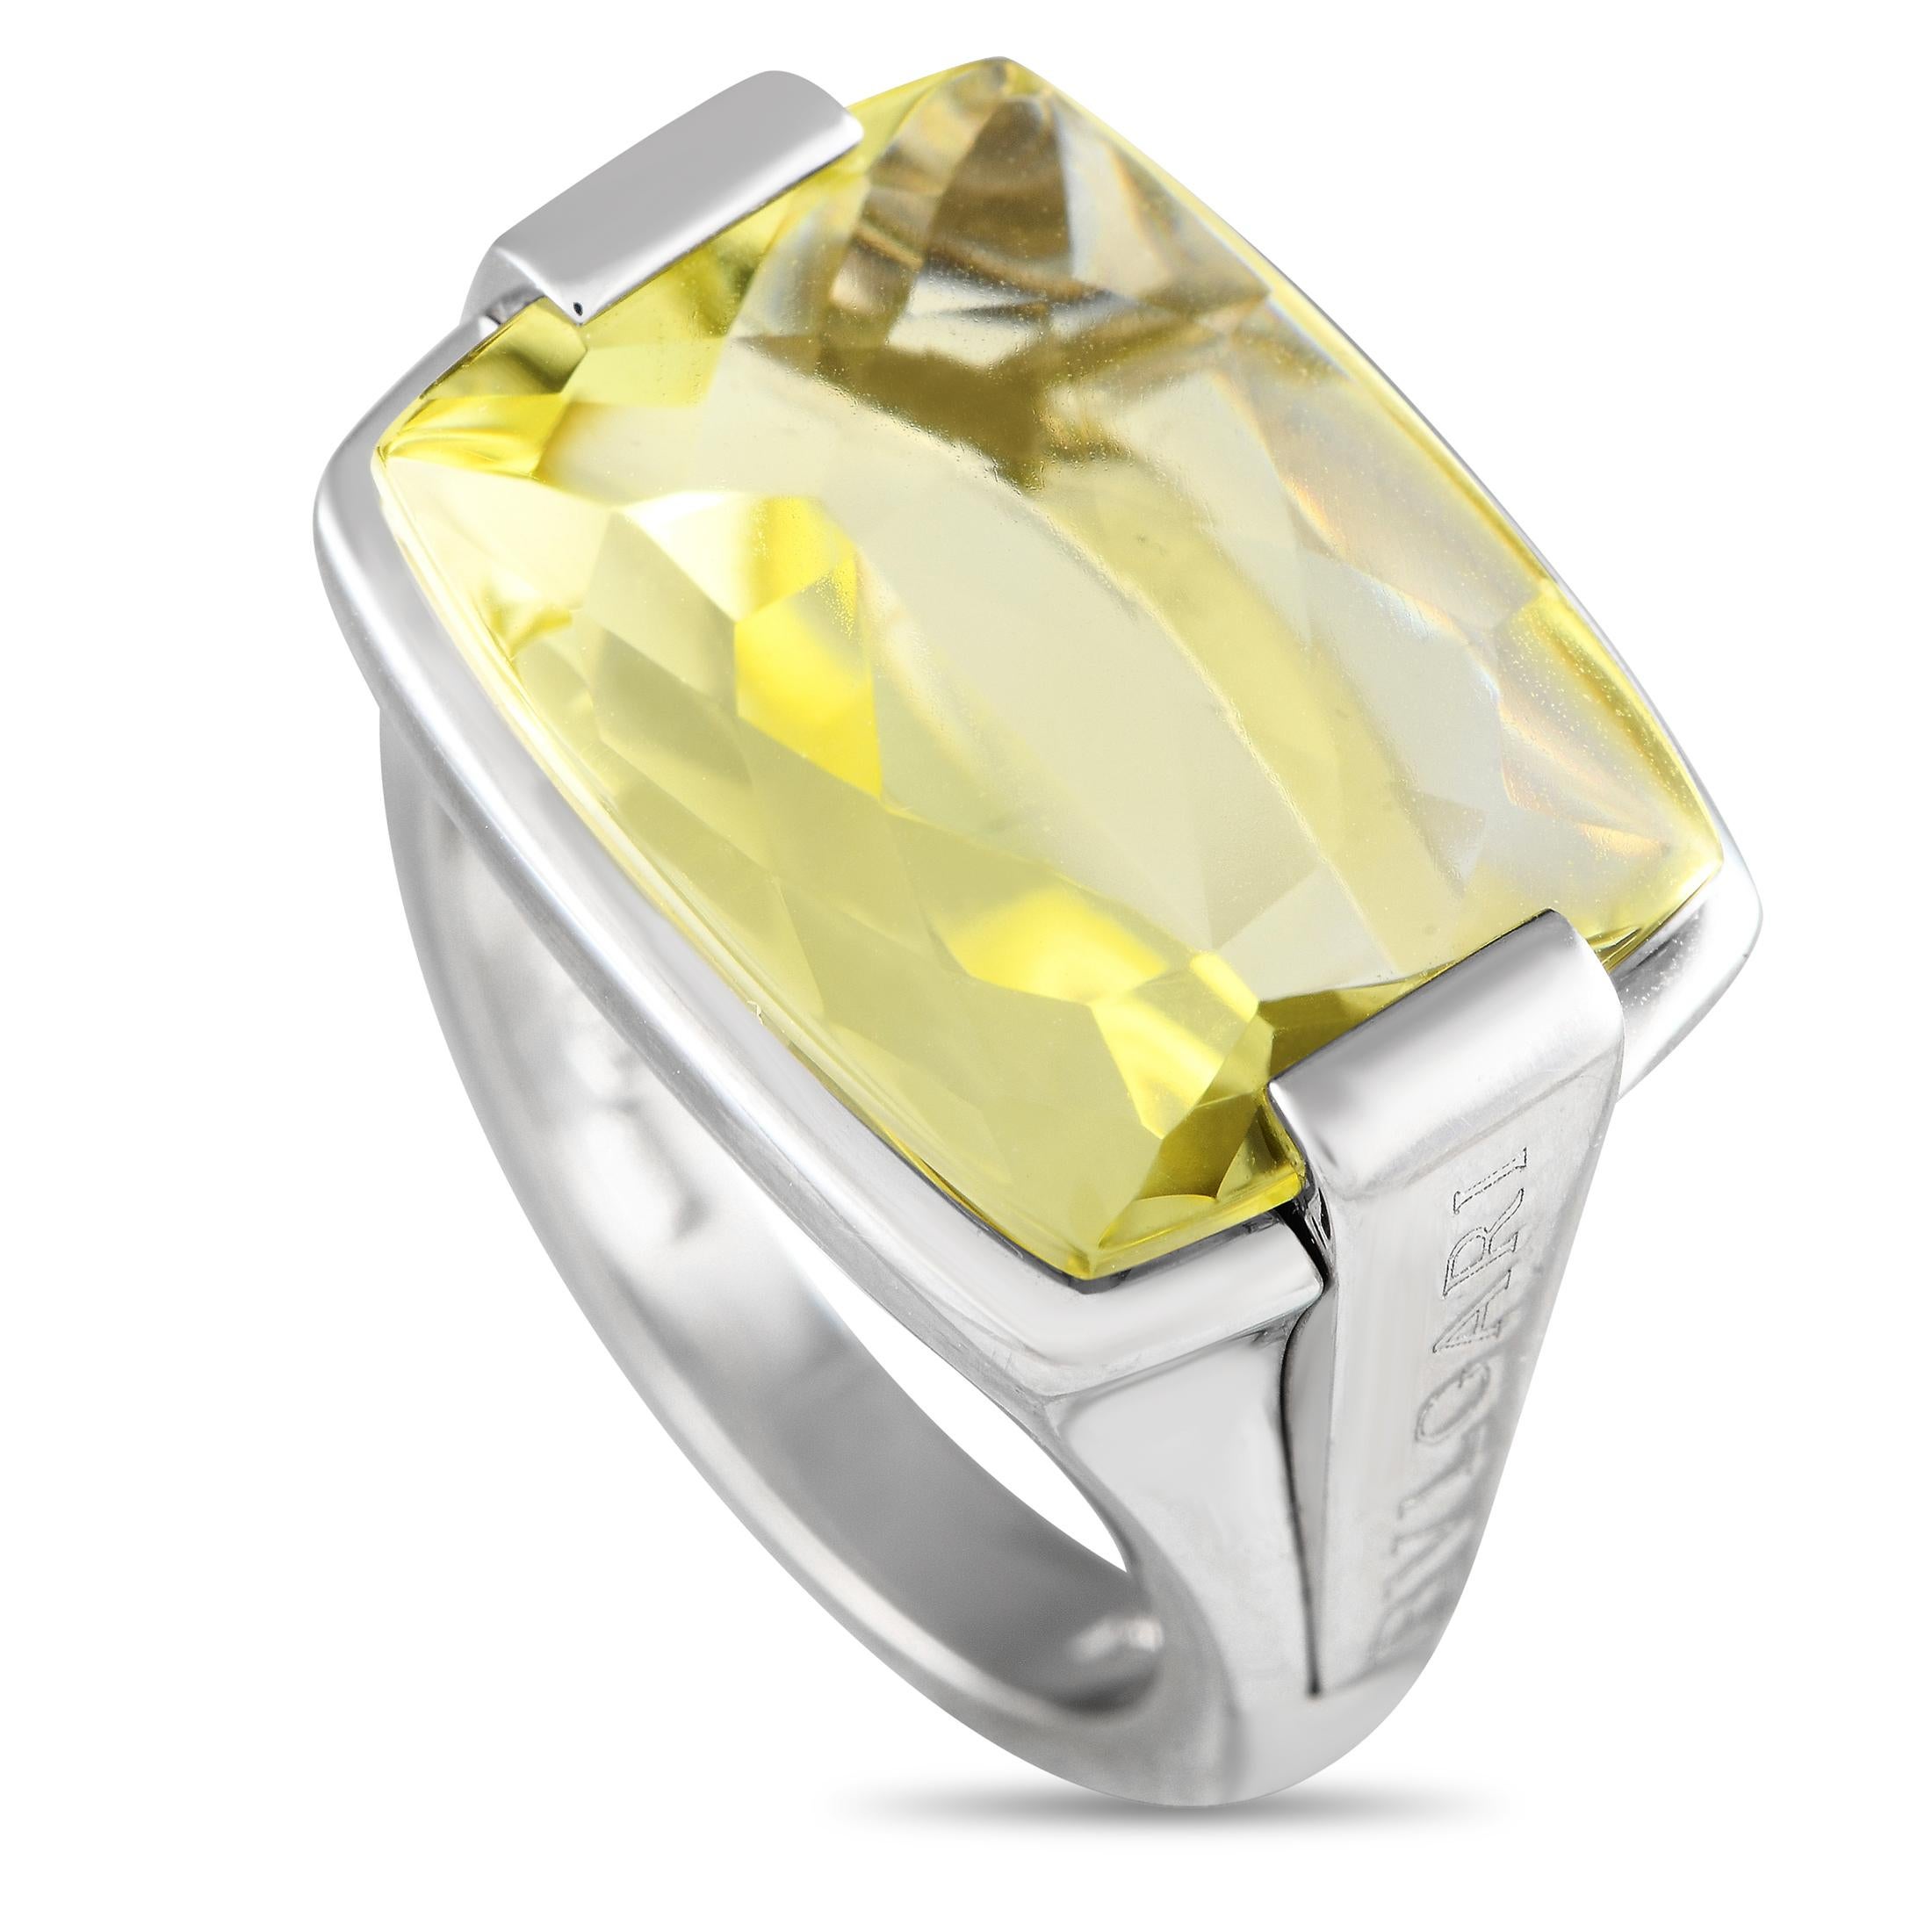 Bvlgari Allegra 18K White Gold Lemon Citrine Ring In Excellent Condition For Sale In Southampton, PA